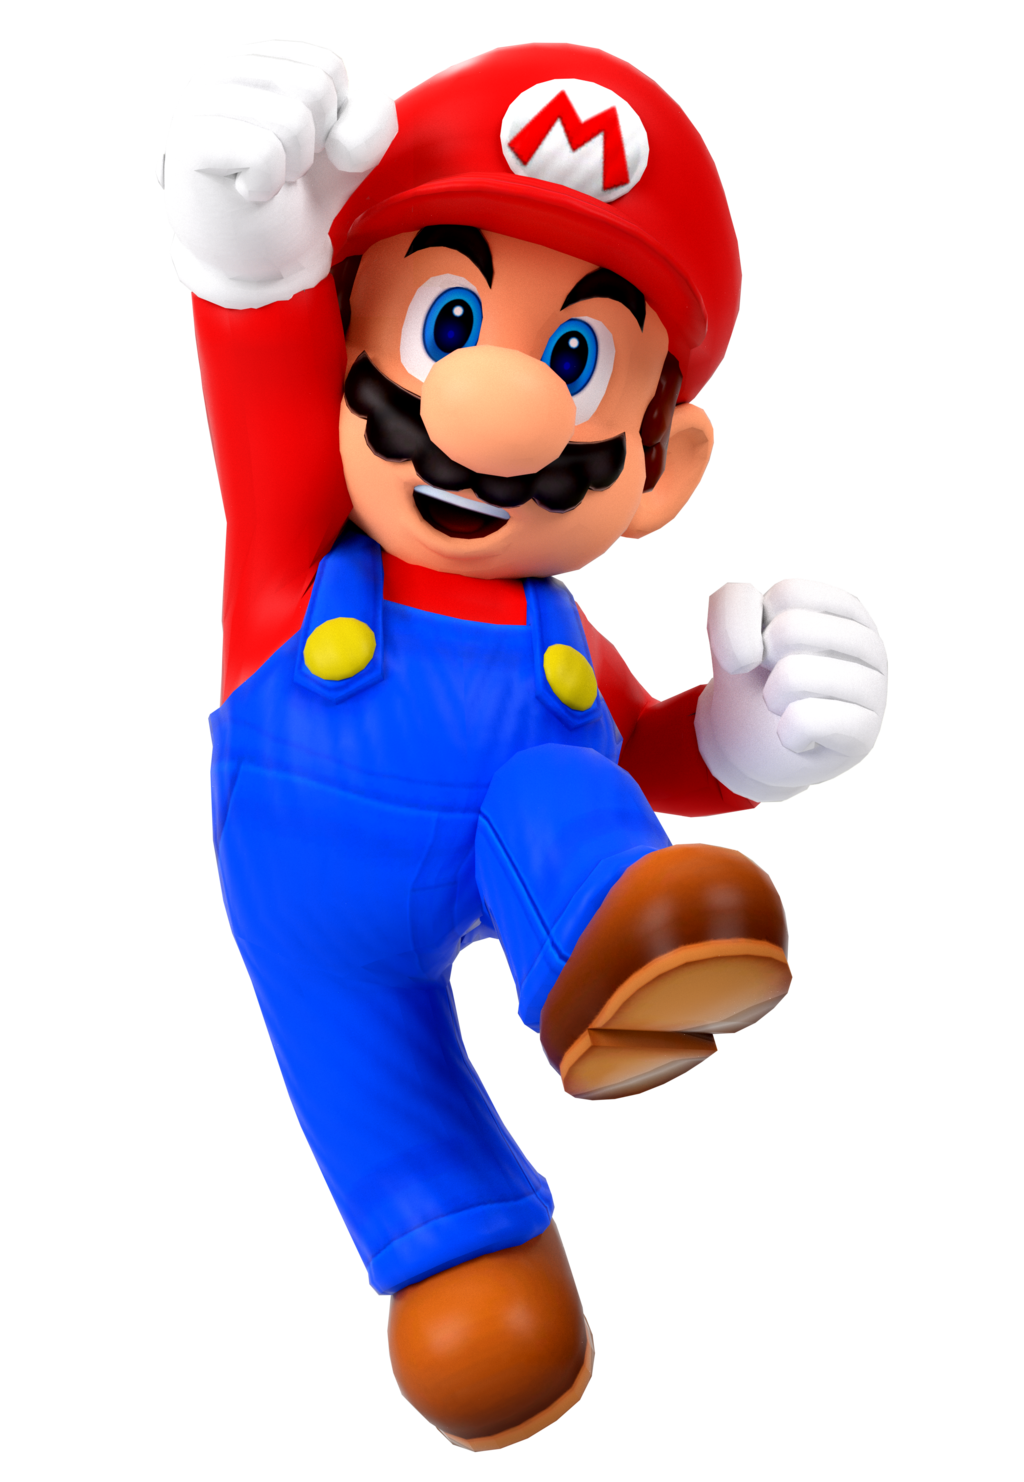 Toy Material Mario 64 World Super Odyssey PNG Image